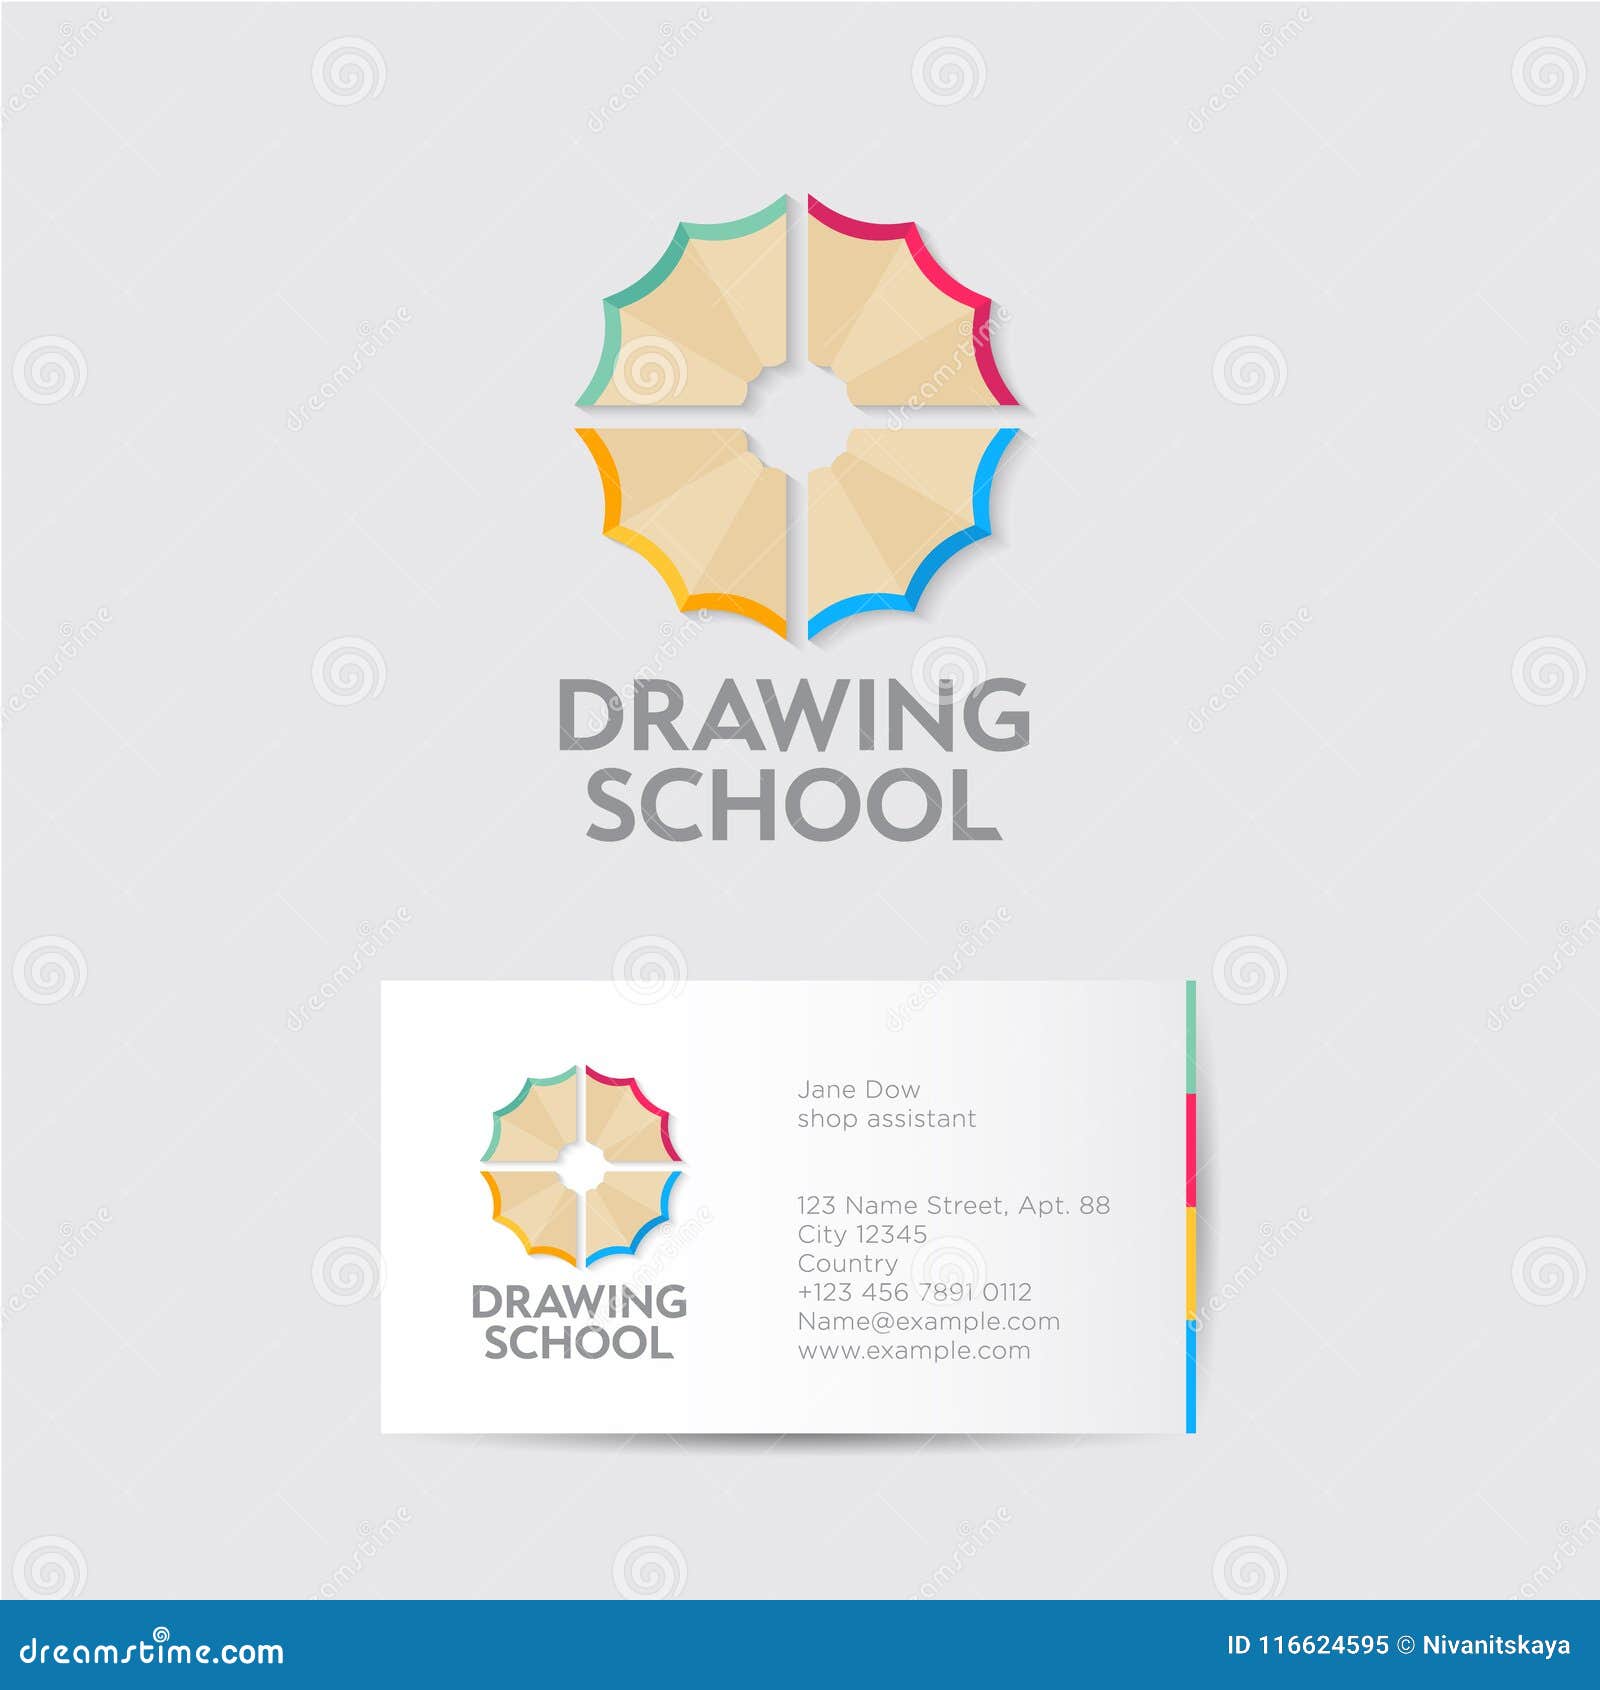 Drawing School Logo And Identity Creativity Emblems Multi Colored Pencil Shavings Like A Flower Stock Vector Illustration Of Yellow Emblem